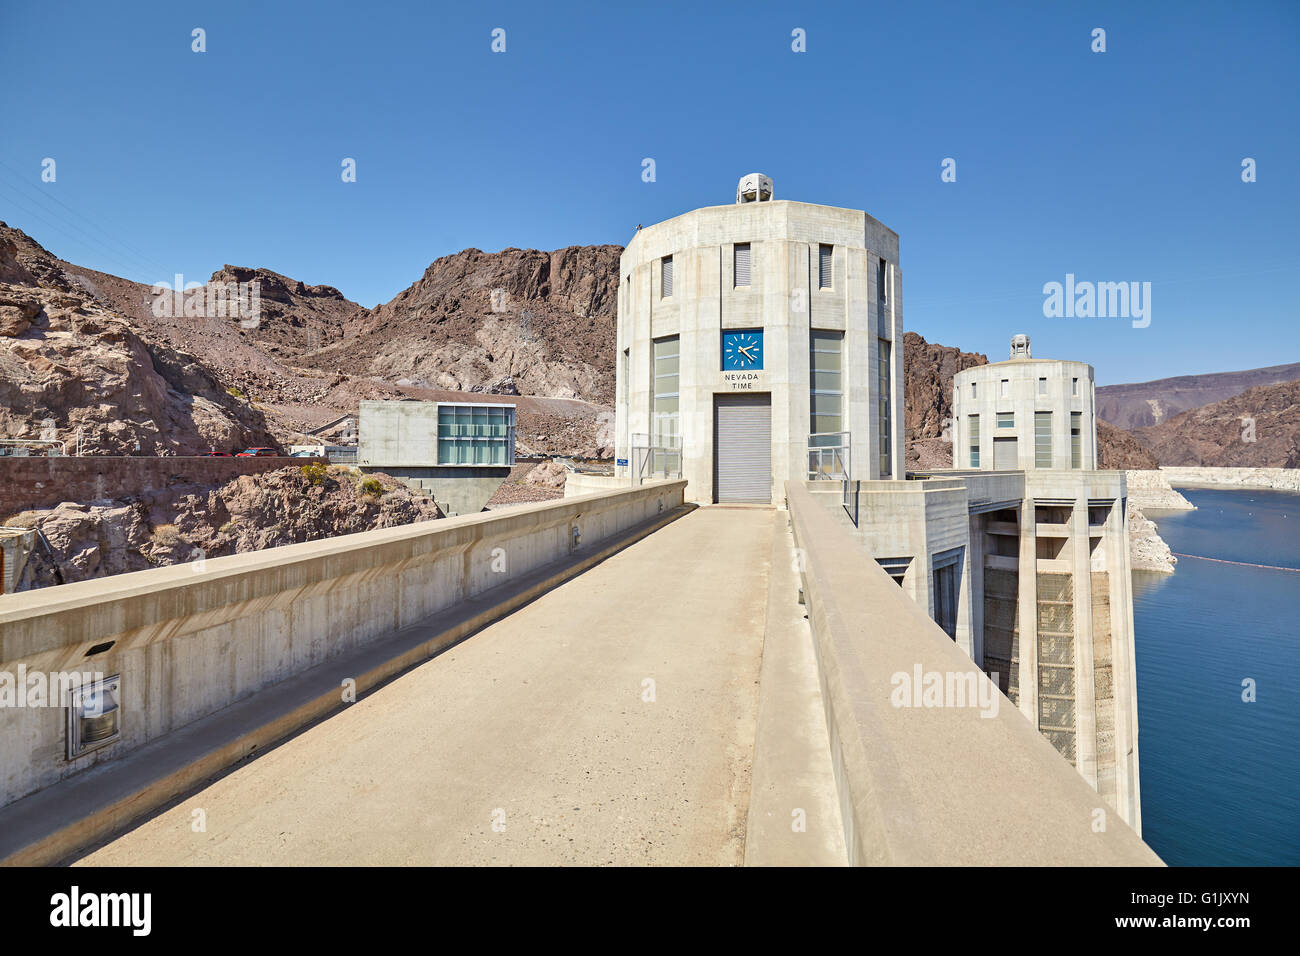 Wide angle picture of the Hoover Dam water intake towers, USA. Stock Photo